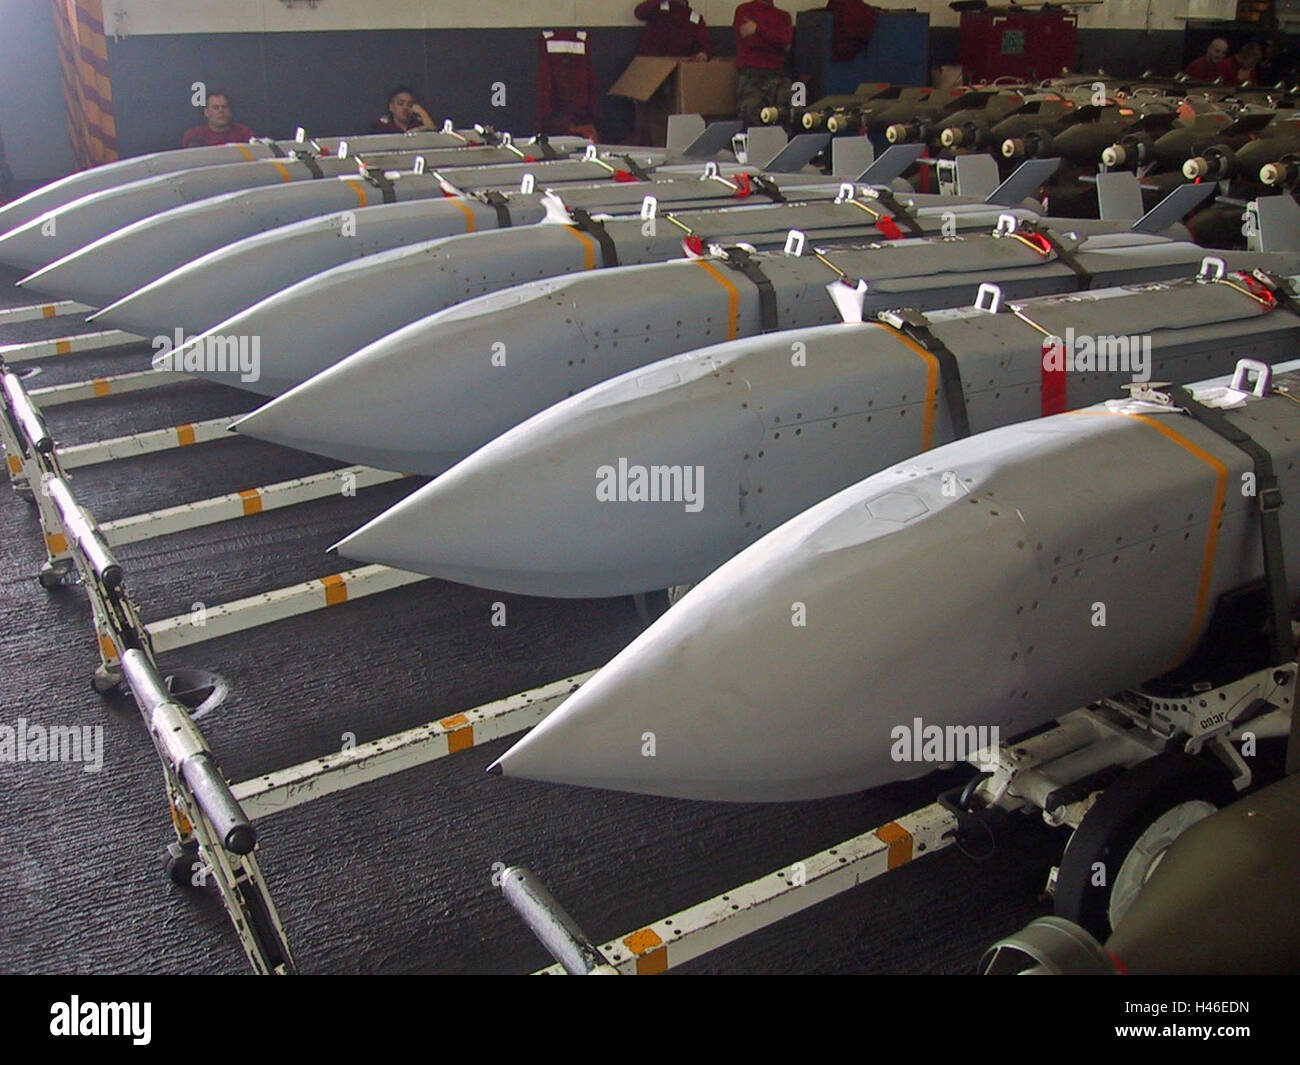 24th March 2003 Operation Iraqi Freedom: Glide bombs on their trolleys on the hangar deck of the USS Abraham Lincoln. Stock Photo